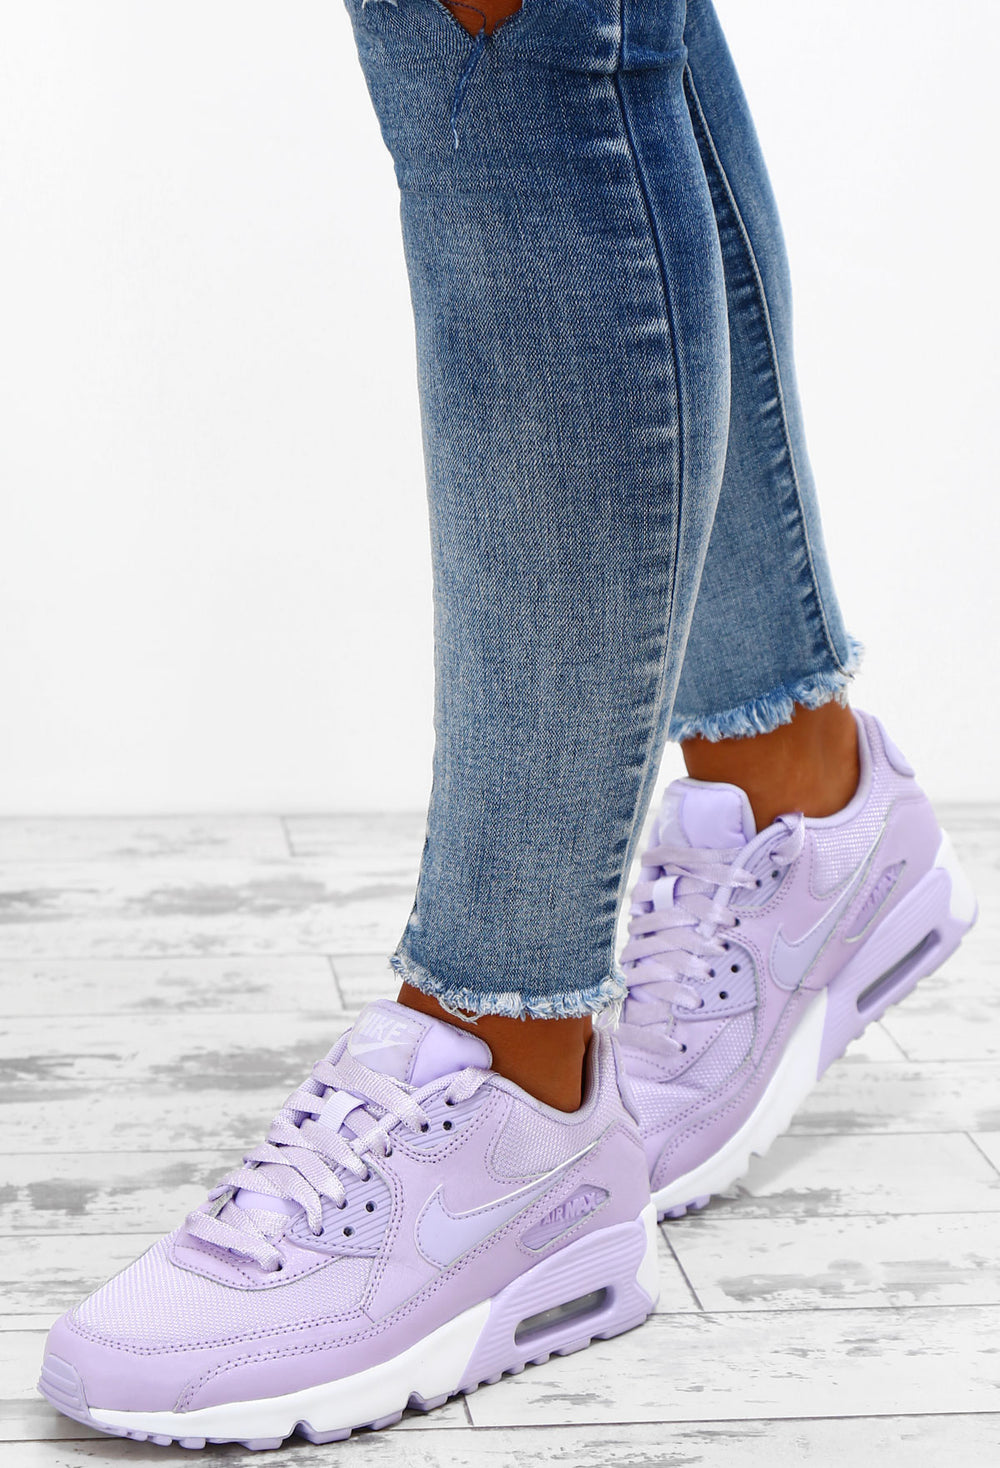 Nike Air Max 90 Lilac Trainers – Pink 